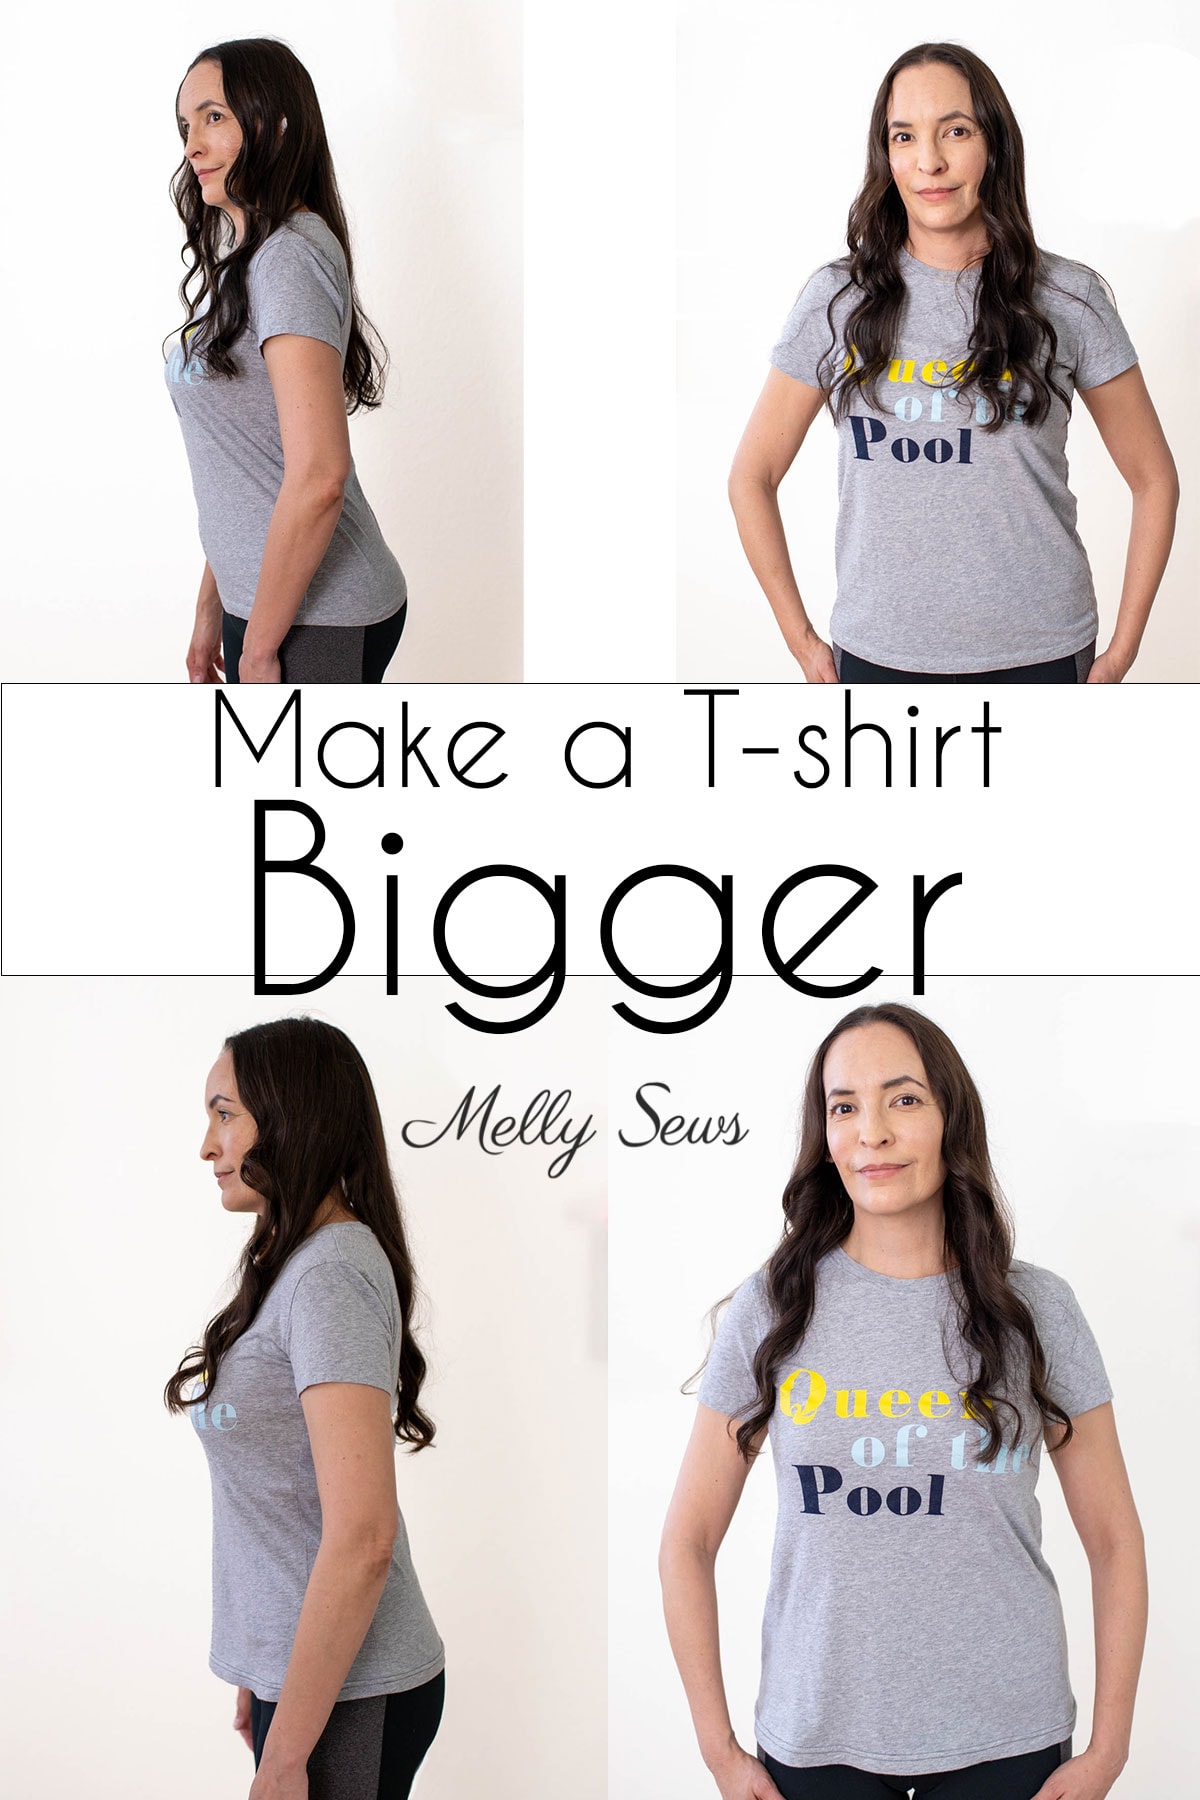 How To Make A Shirt Bigger: Video & Tutorial for a T-shirt - Melly Sews